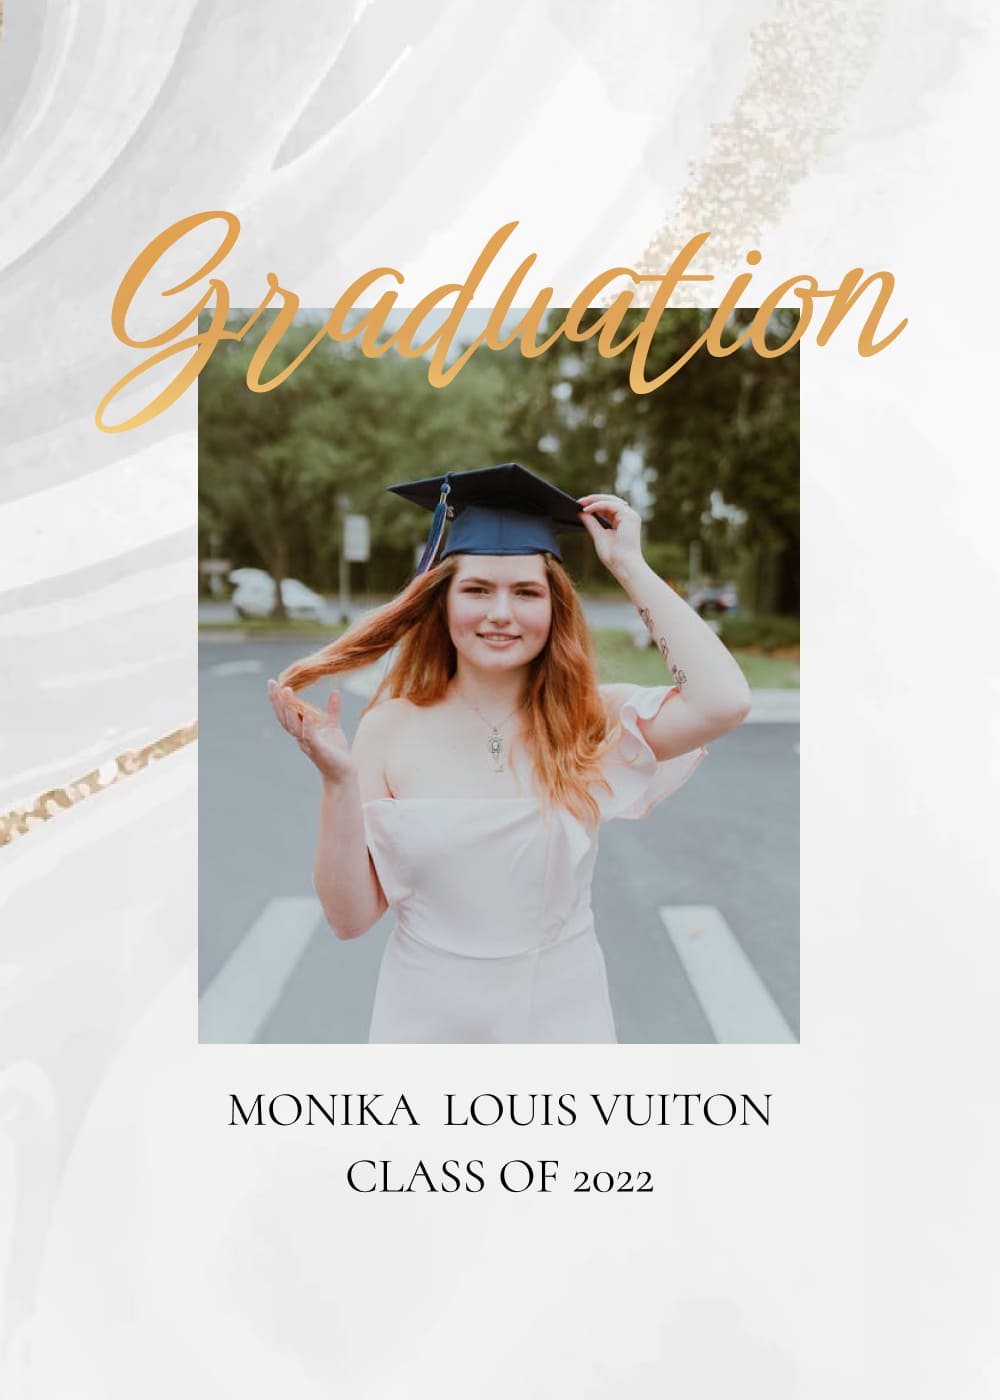 Delicate invitation with a girl for a graduation.